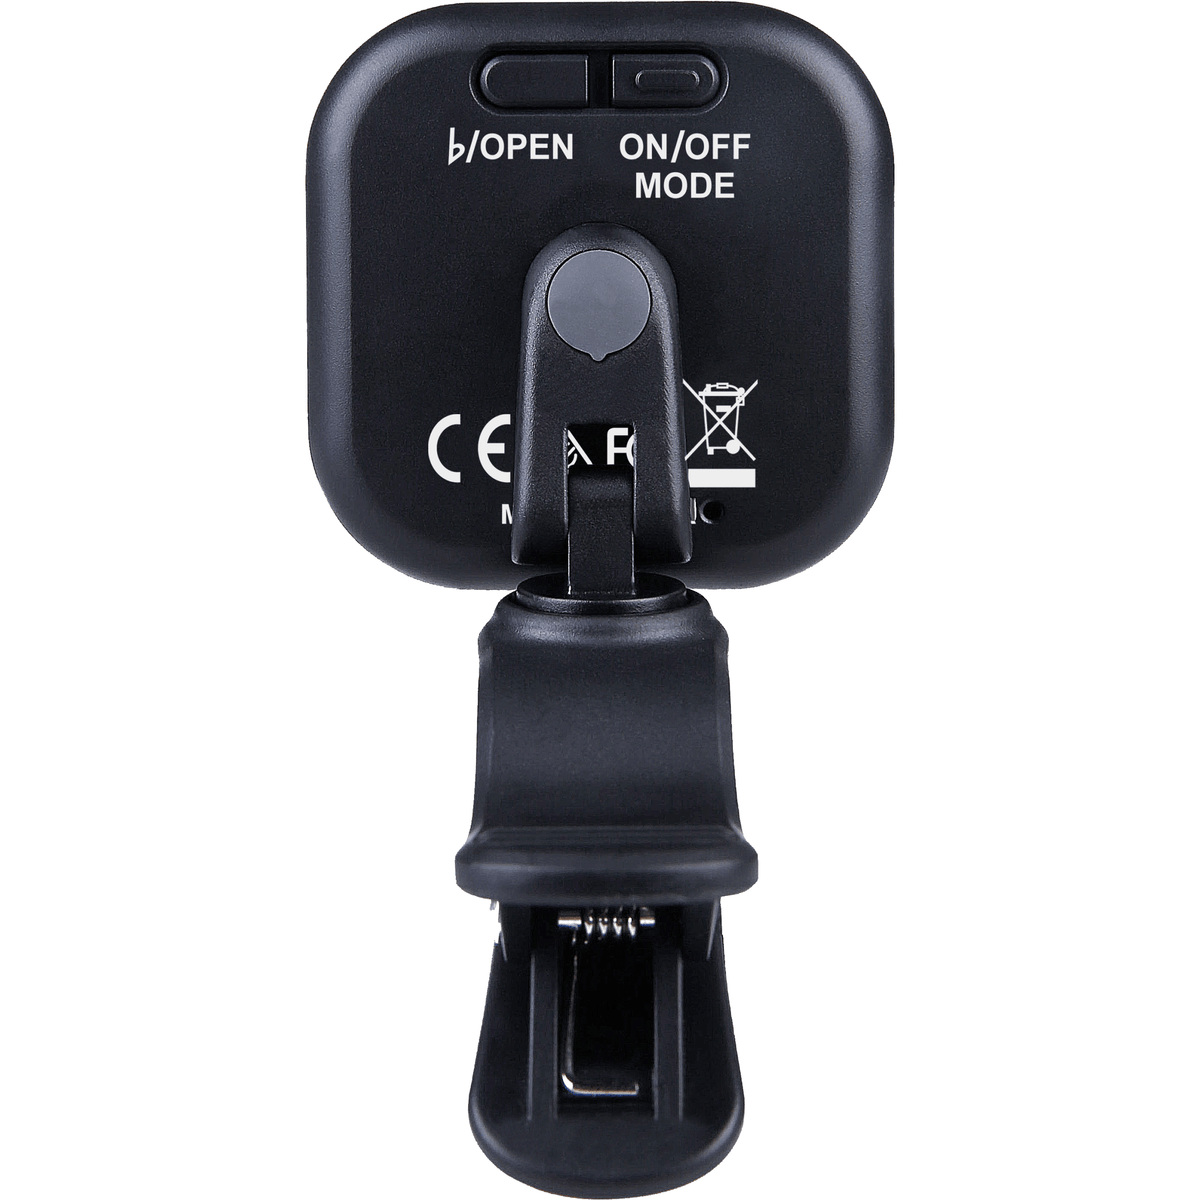 Fender Guitar Accessories Fender Flash Guitar Tuner Clip-On Rechargeable Black - Byron Music